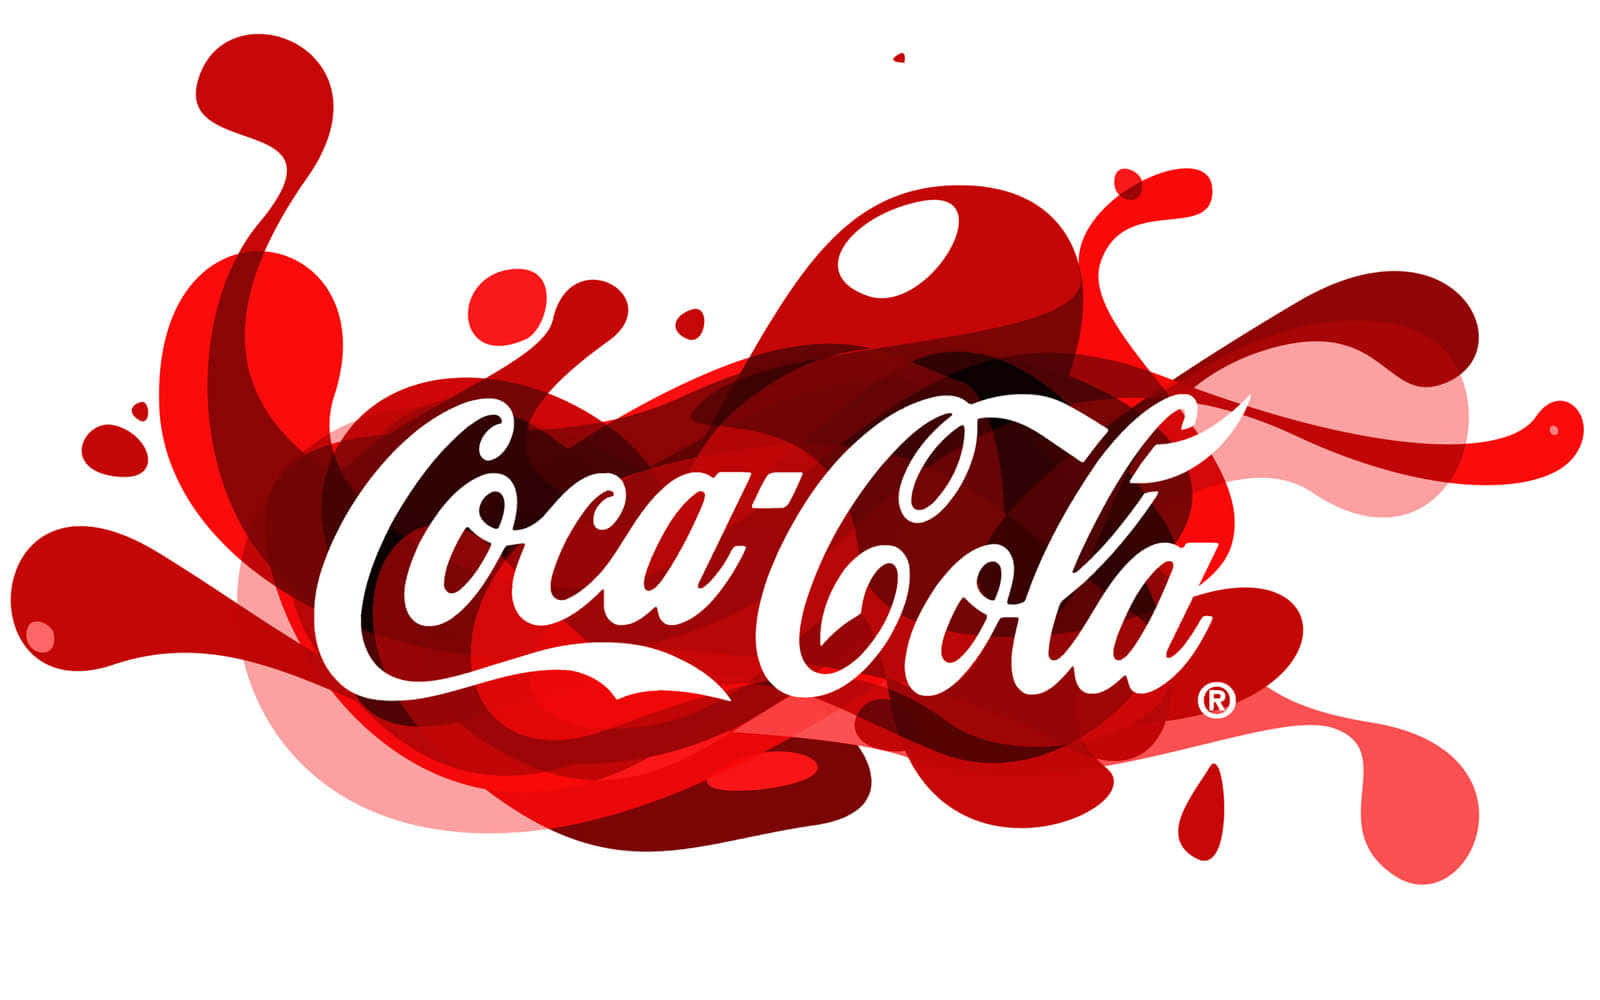 Coca Cola Logo With Red Splashes